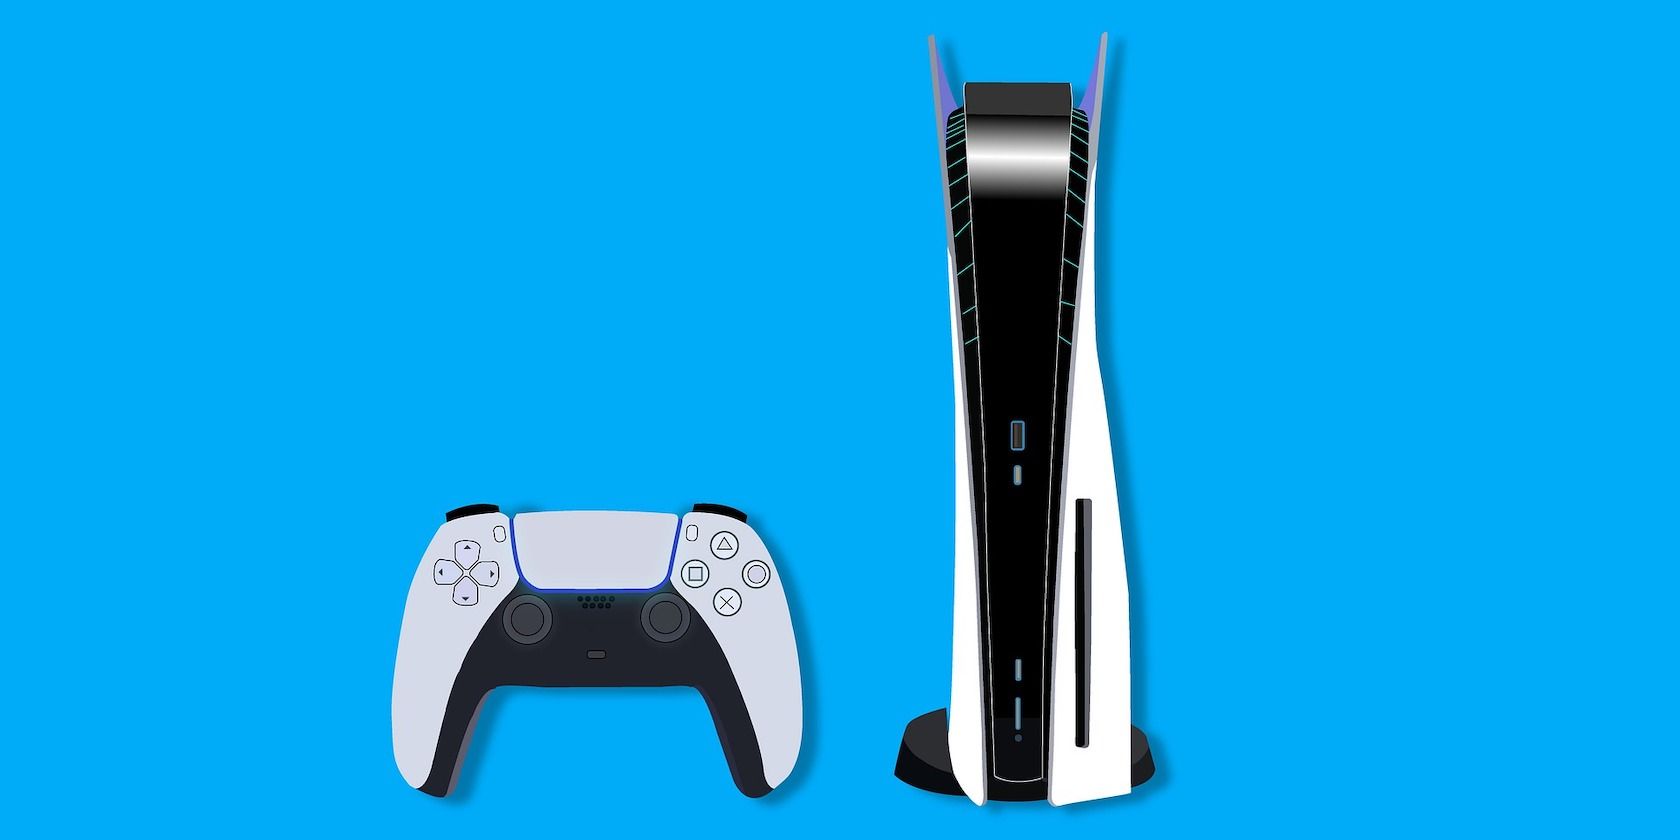 A PS5 and a DualSense controller with a blue background